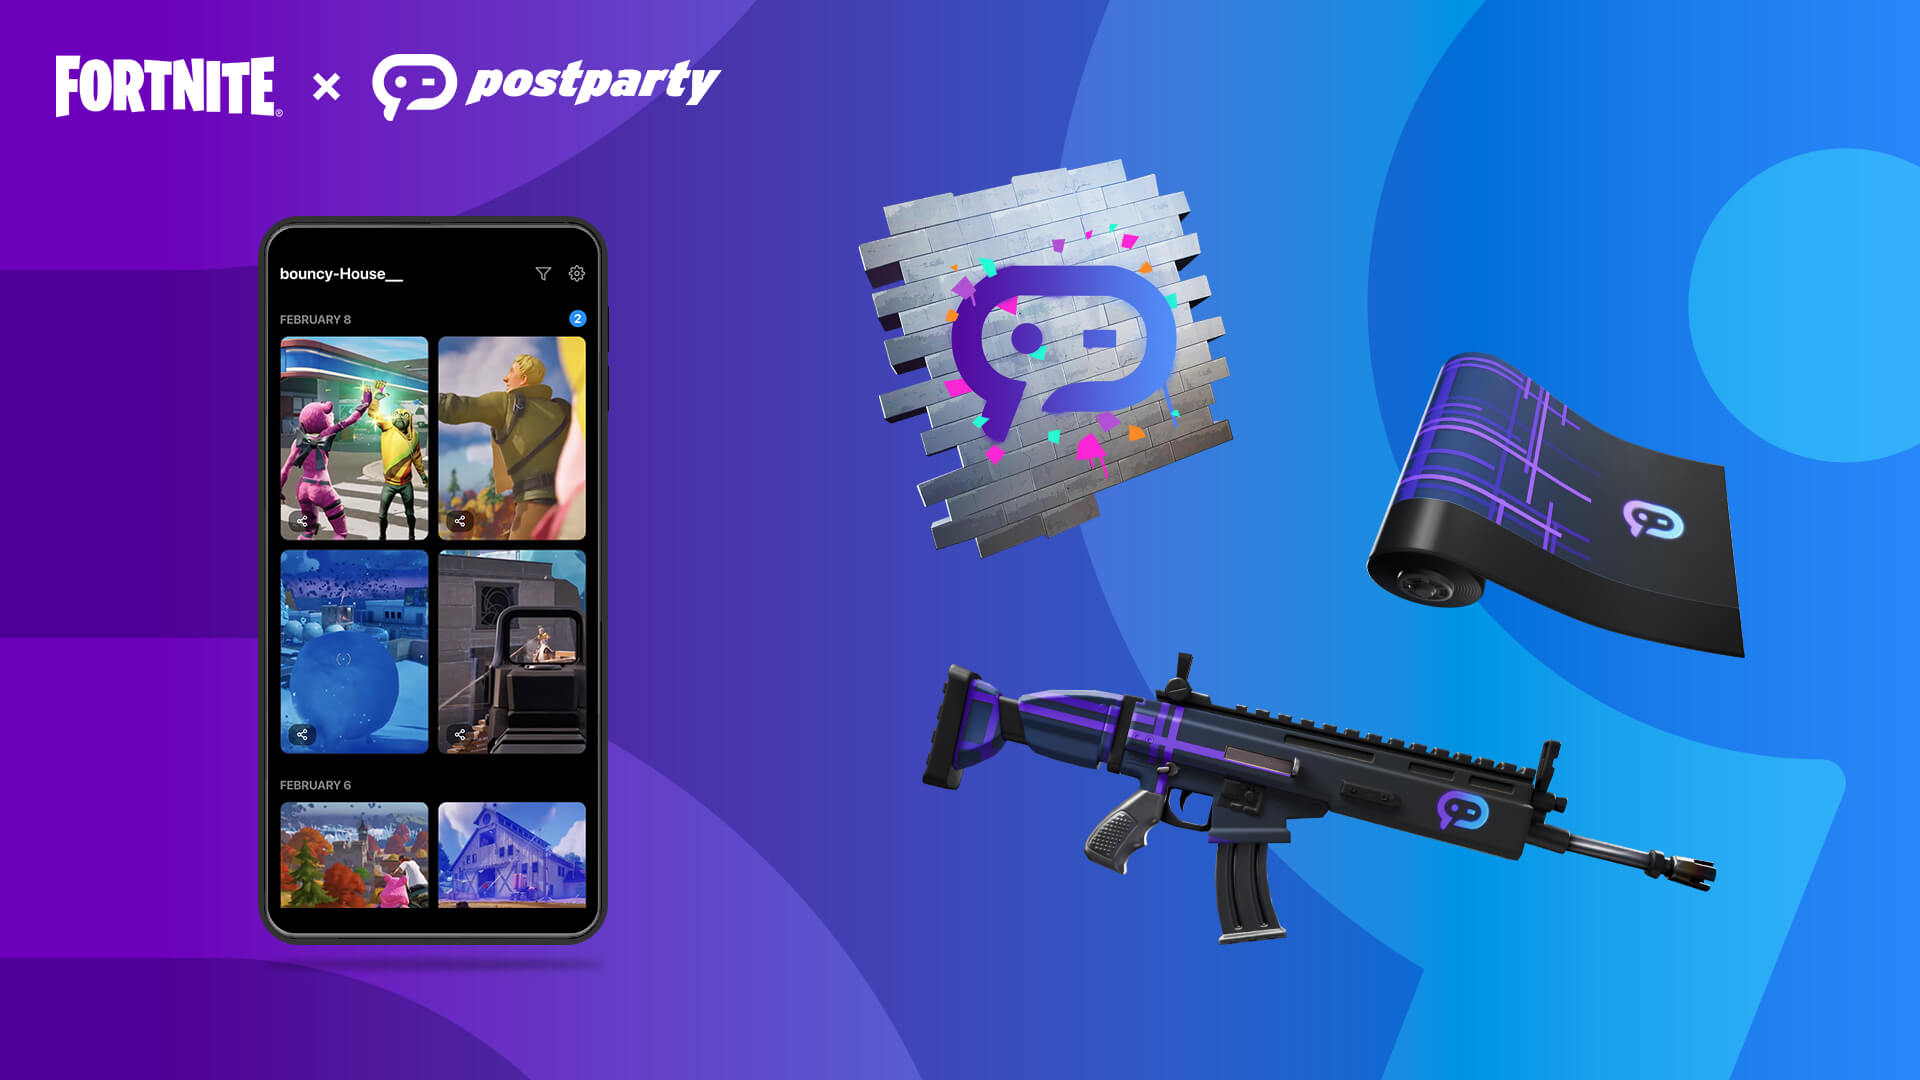 Fortnite Postparty app and in-game skins